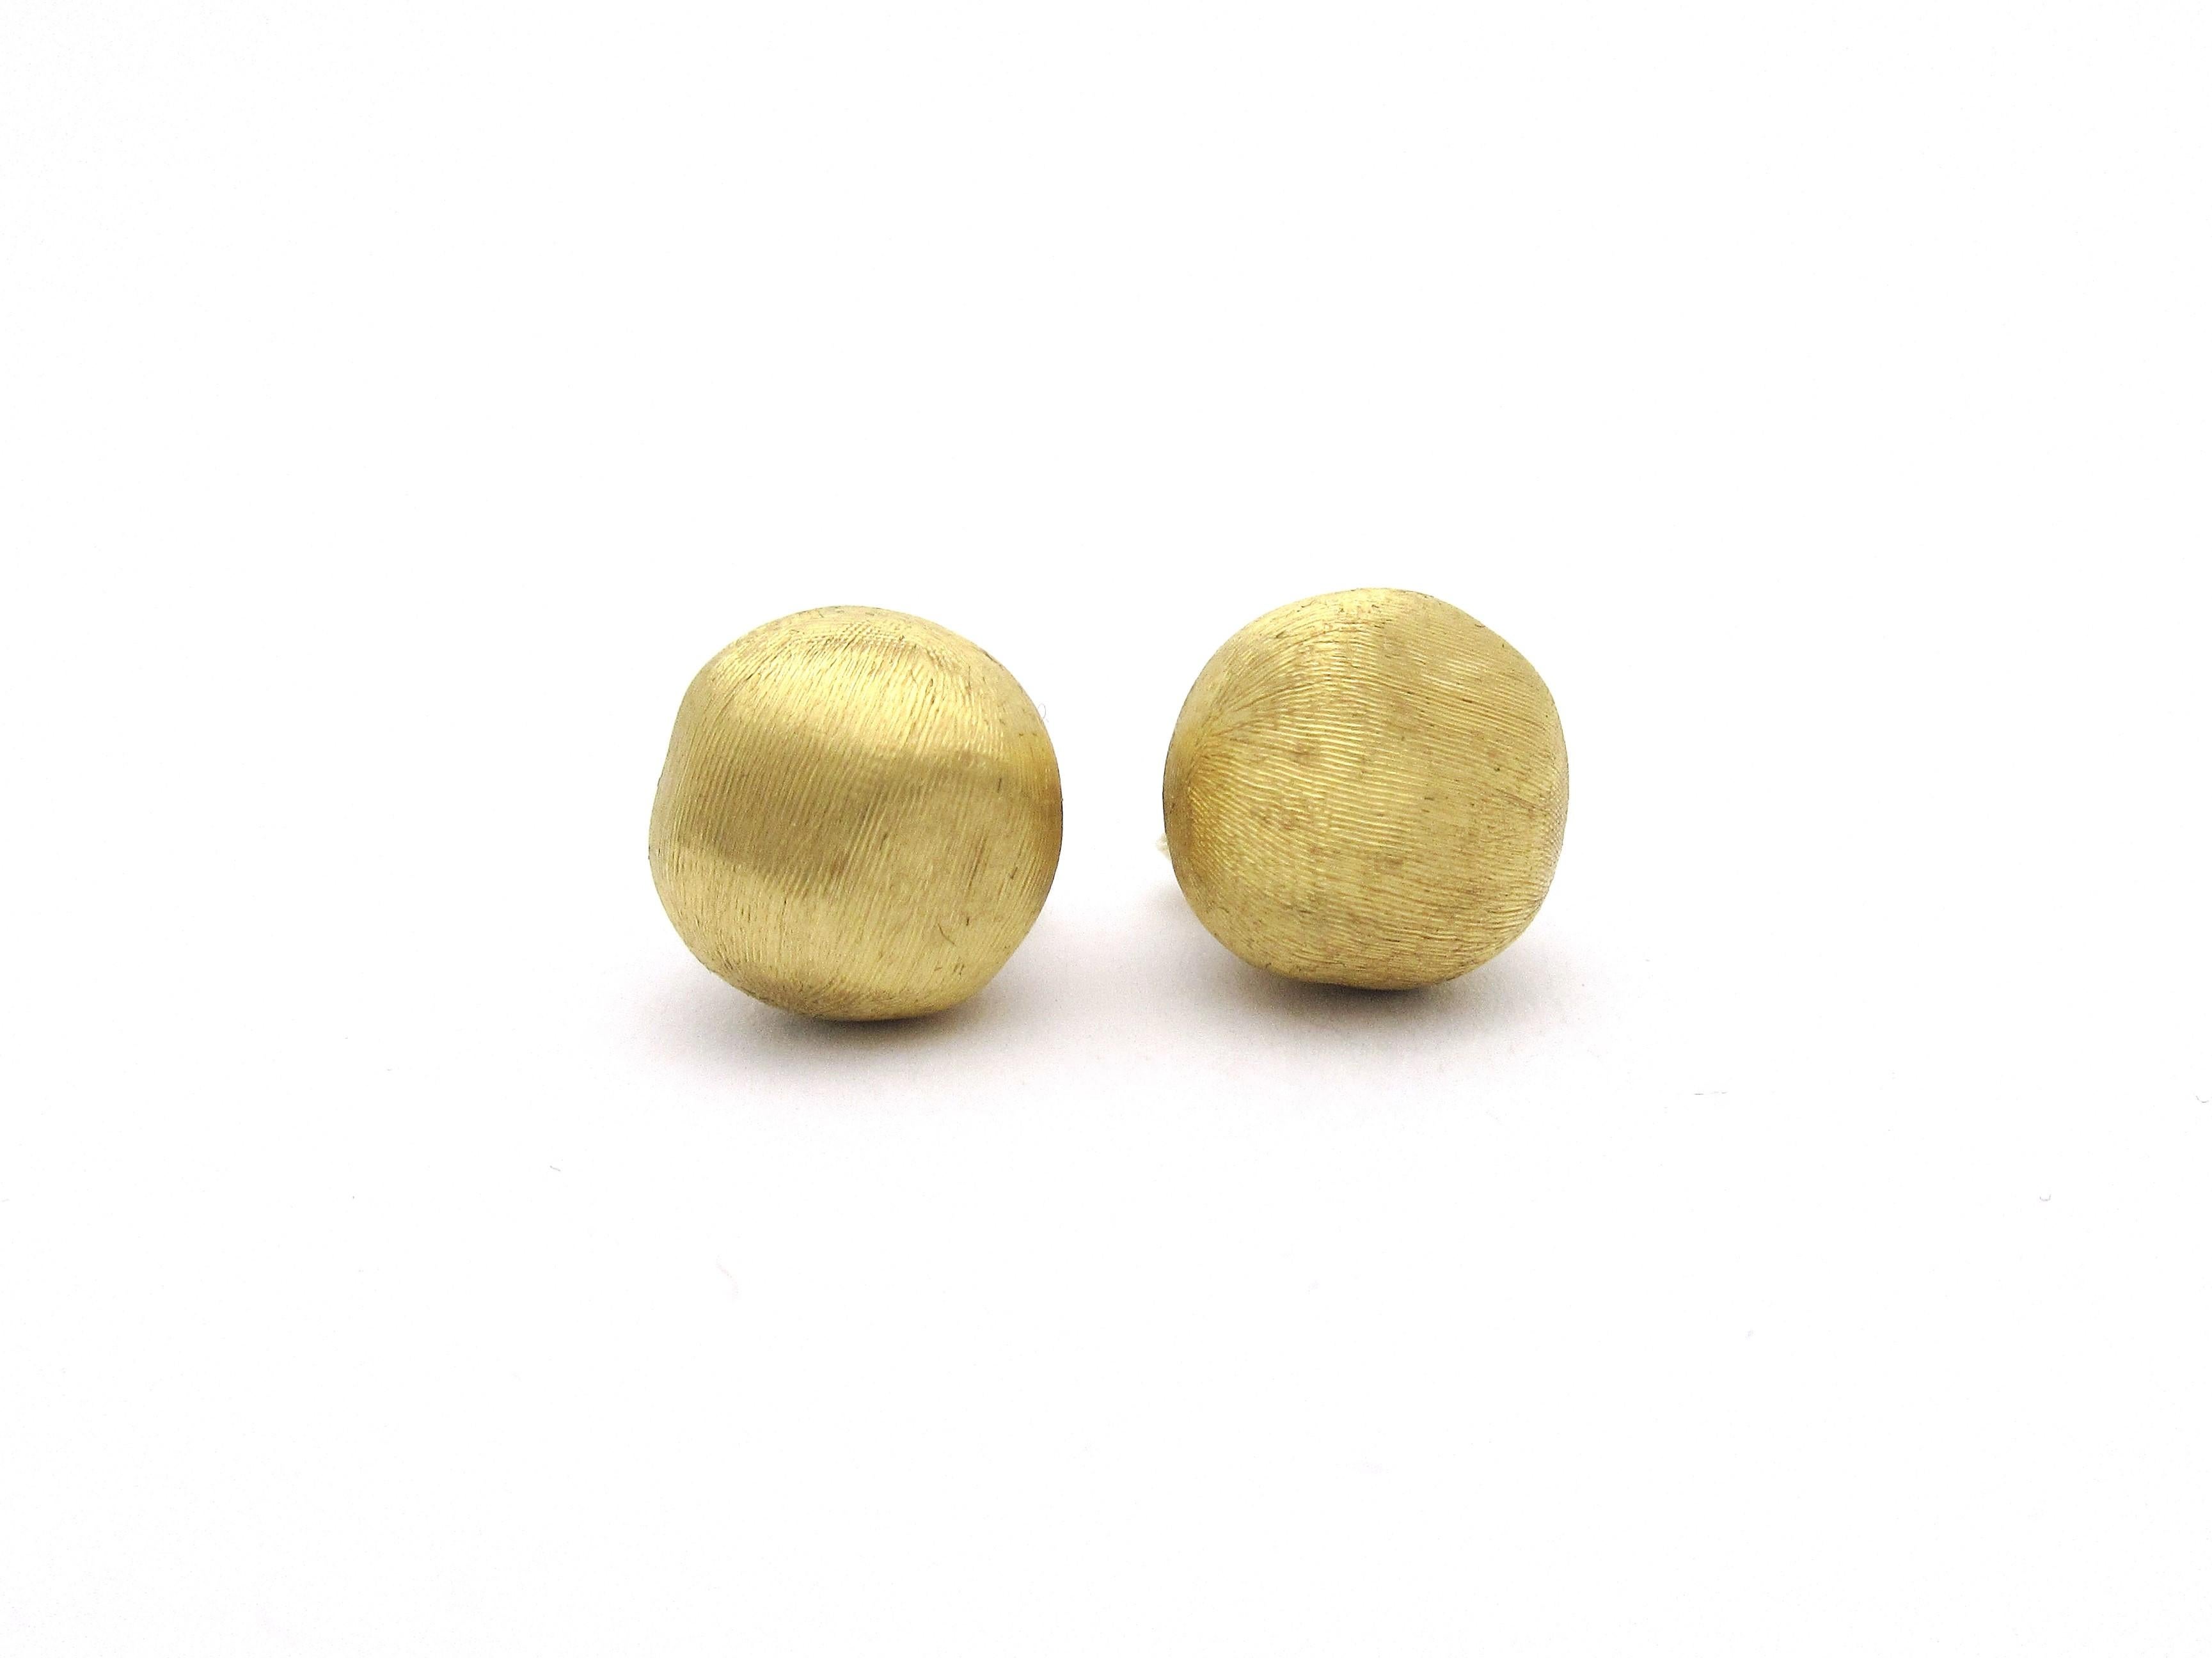 A lovely pair of stud earrings by designer Marco Bicego from his Africa collection.  The 18k yellow gold textured pebble measures roughly 10mm and the earrings are fully hallmarked on the back and on the posts.  They come with the original earring